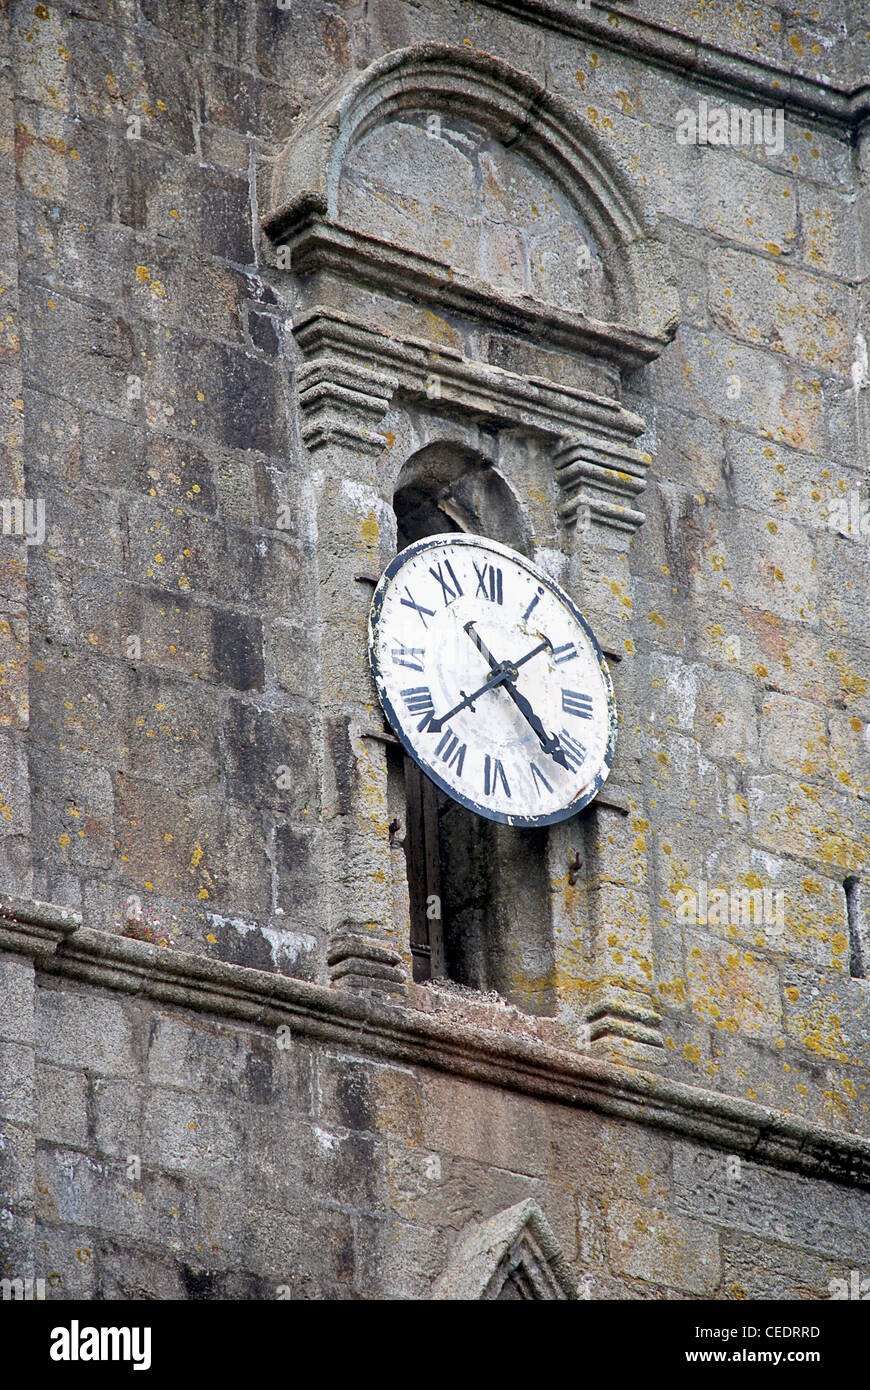 France, Brittany, old church clock Stock Photo